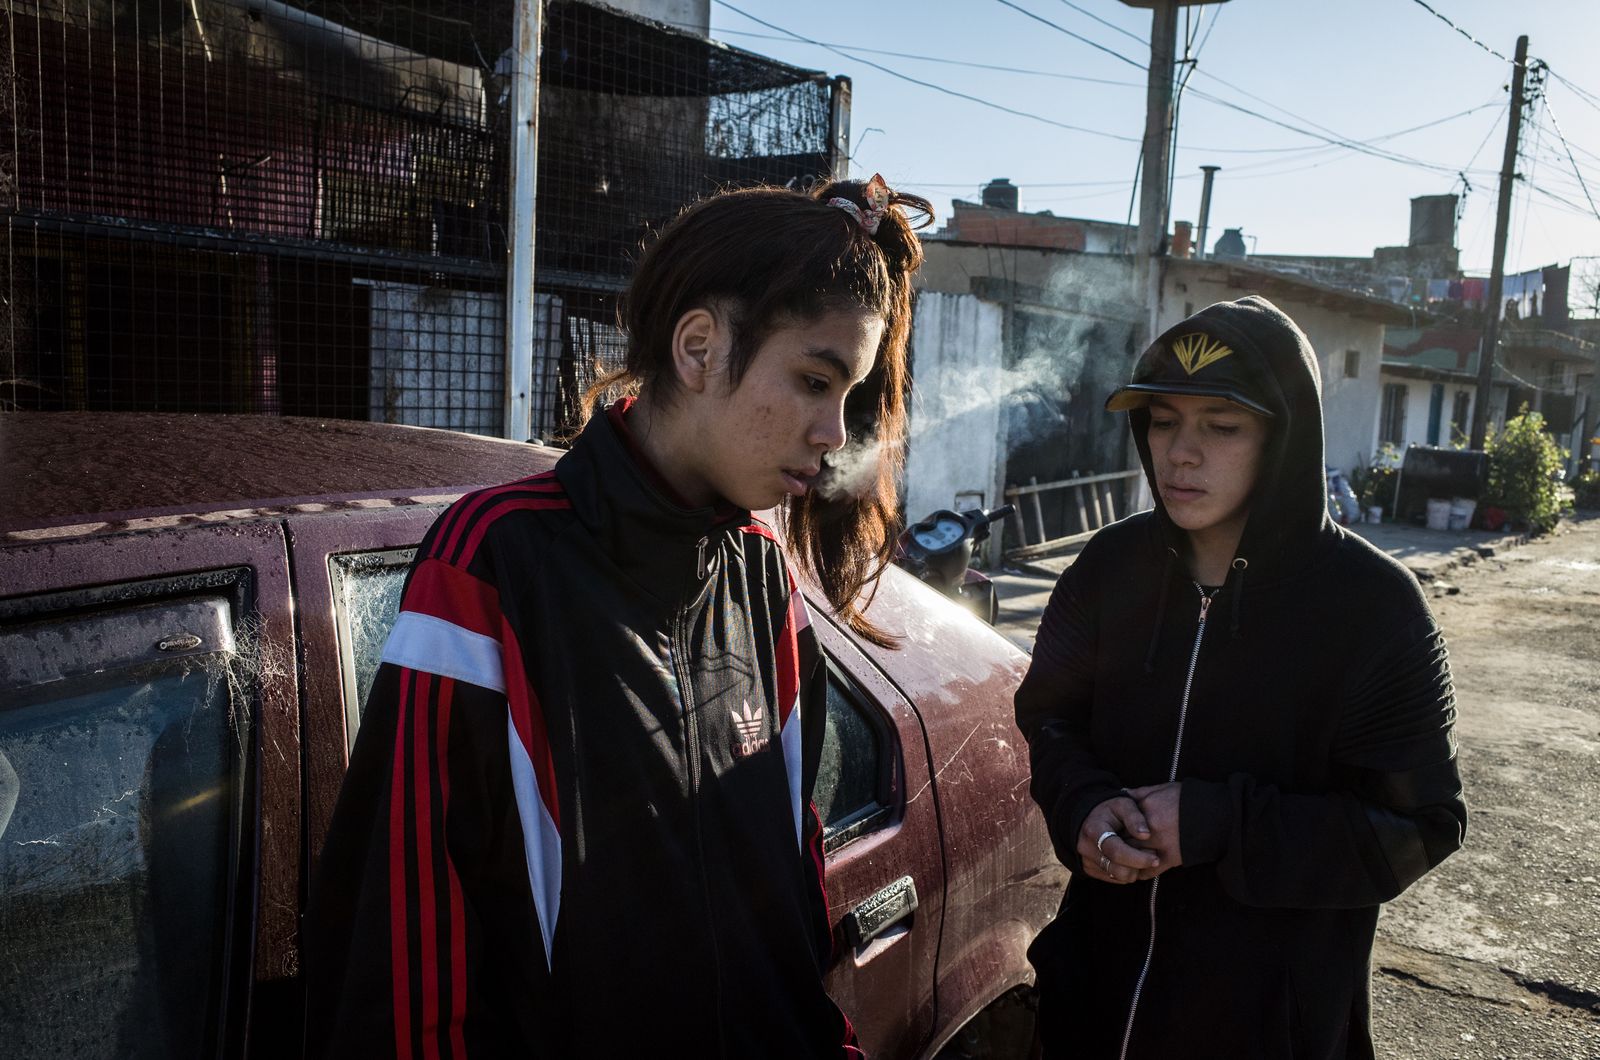 © Karl Mancini - Buenos Aires, Isla Maciel. K. and F. warm up by smoking on a cold morning after a night spent on the street.